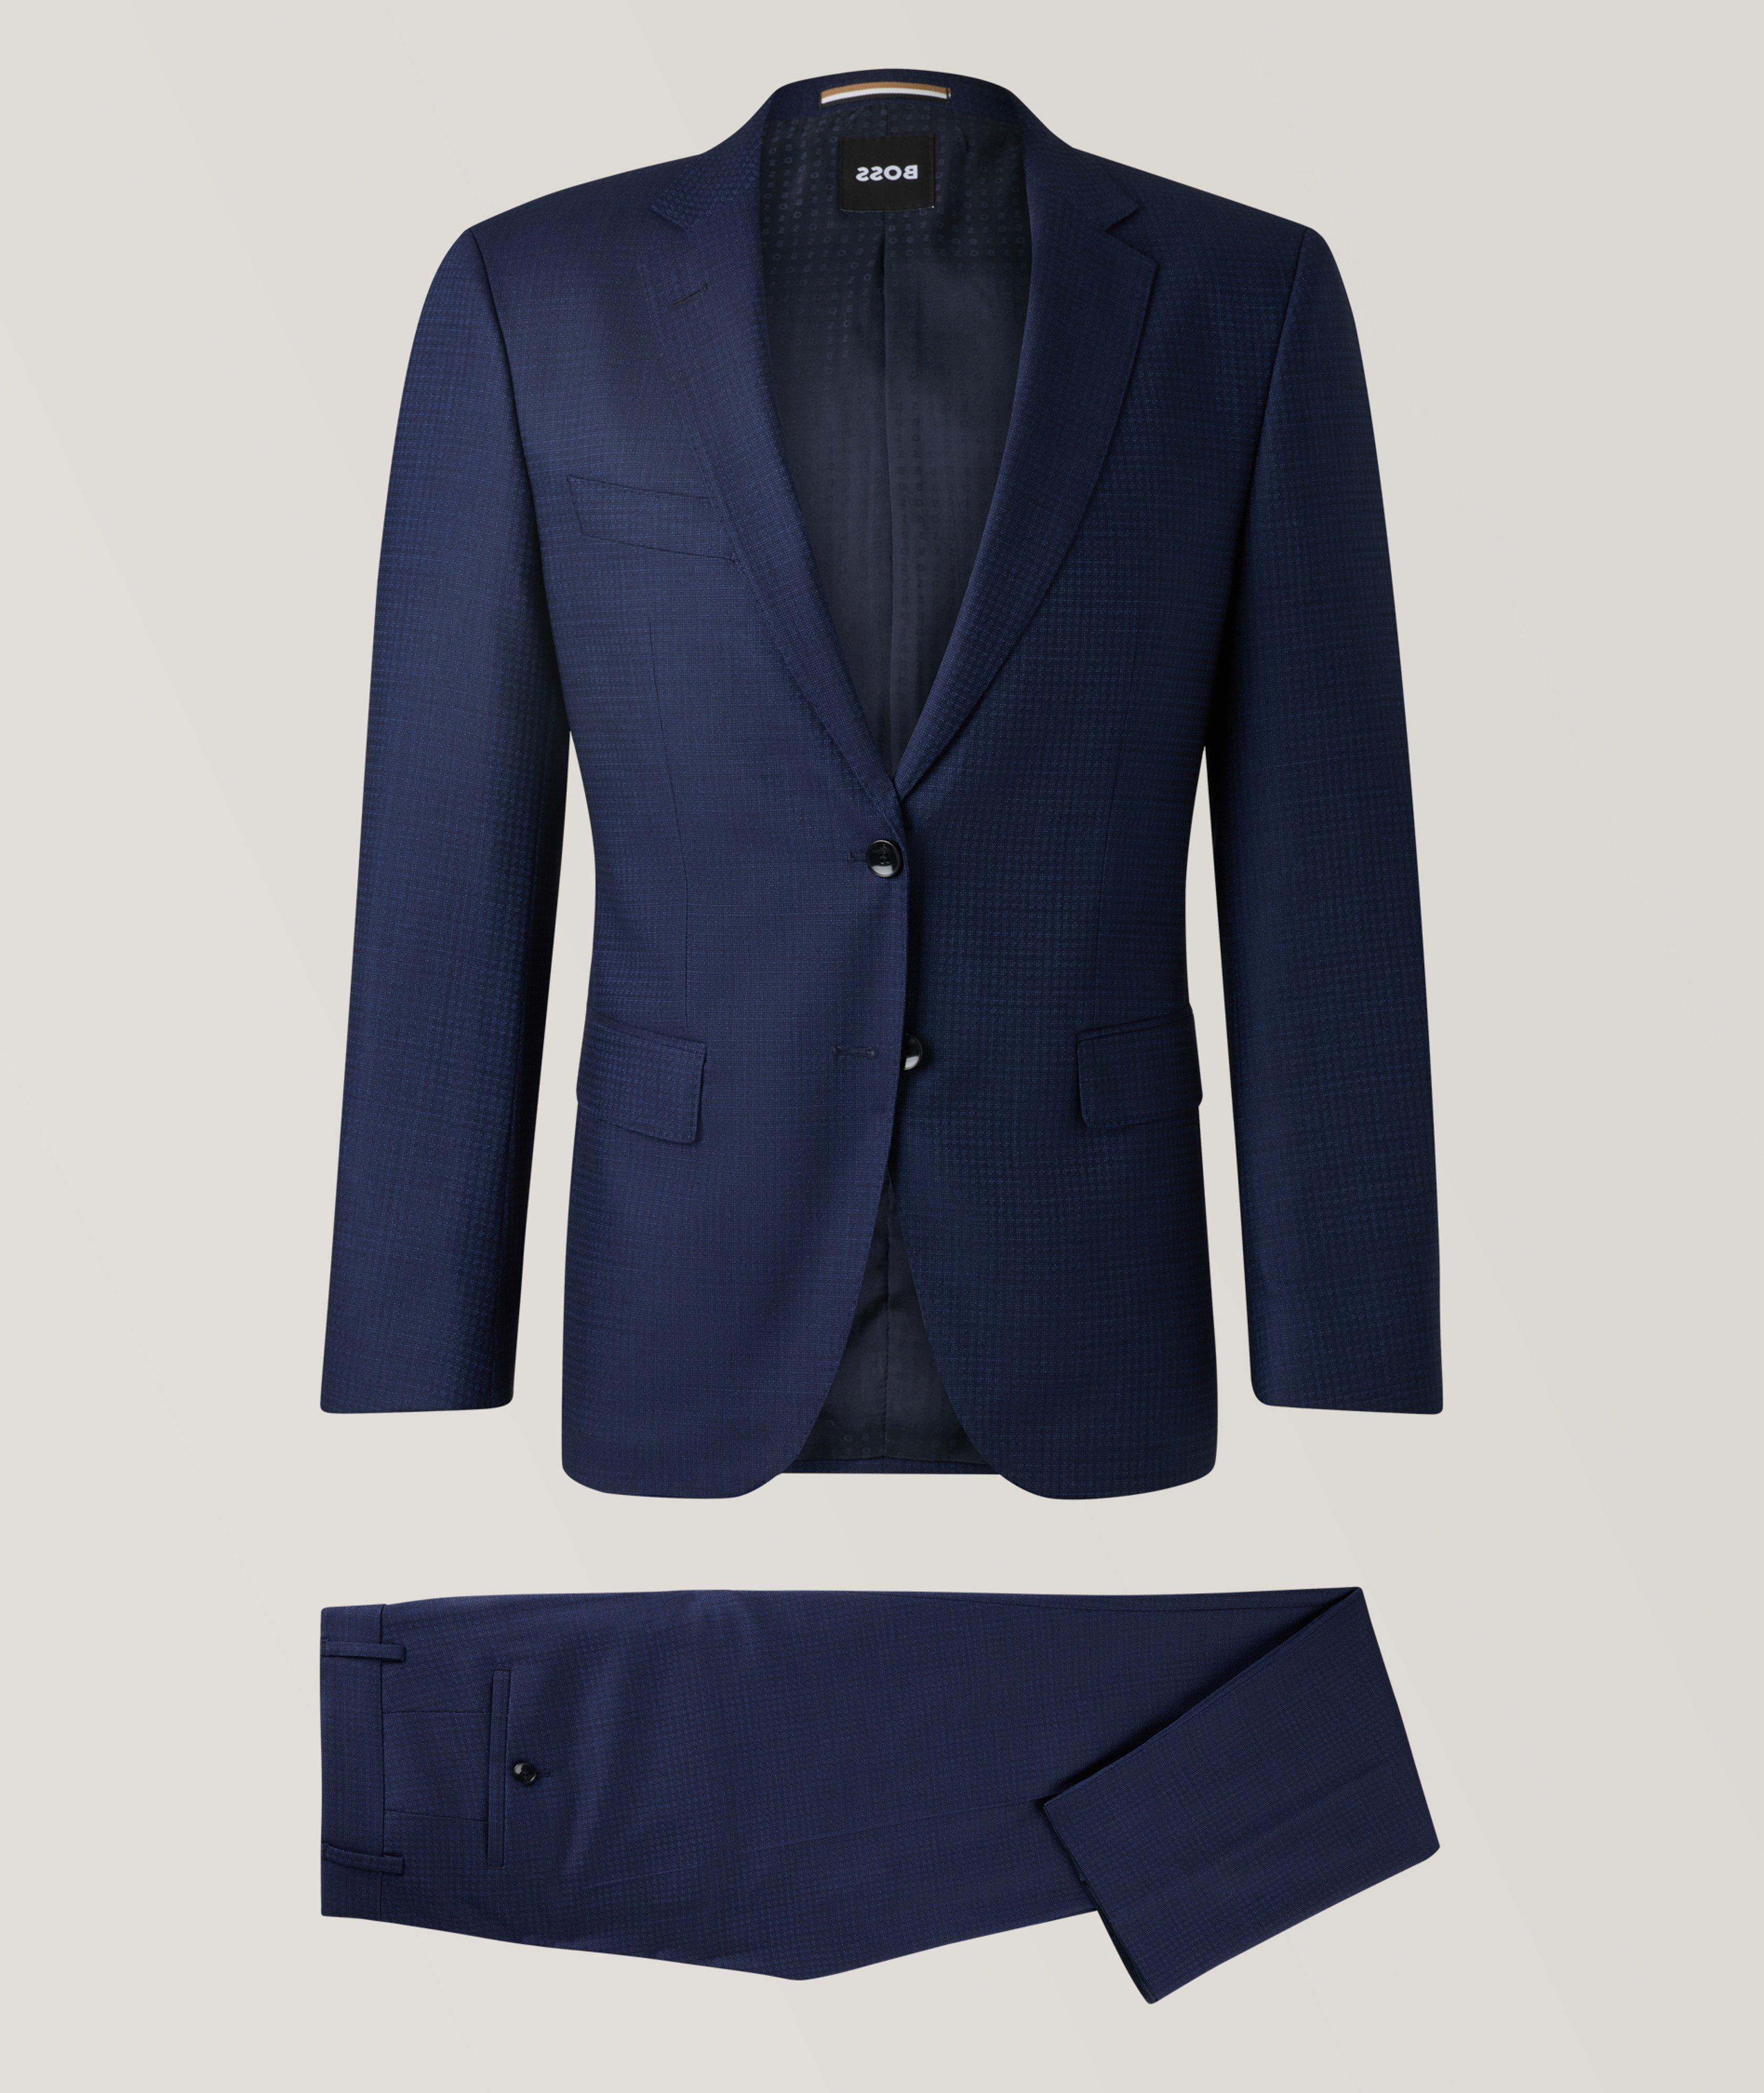 Checked Slim-Fit Suit image 0